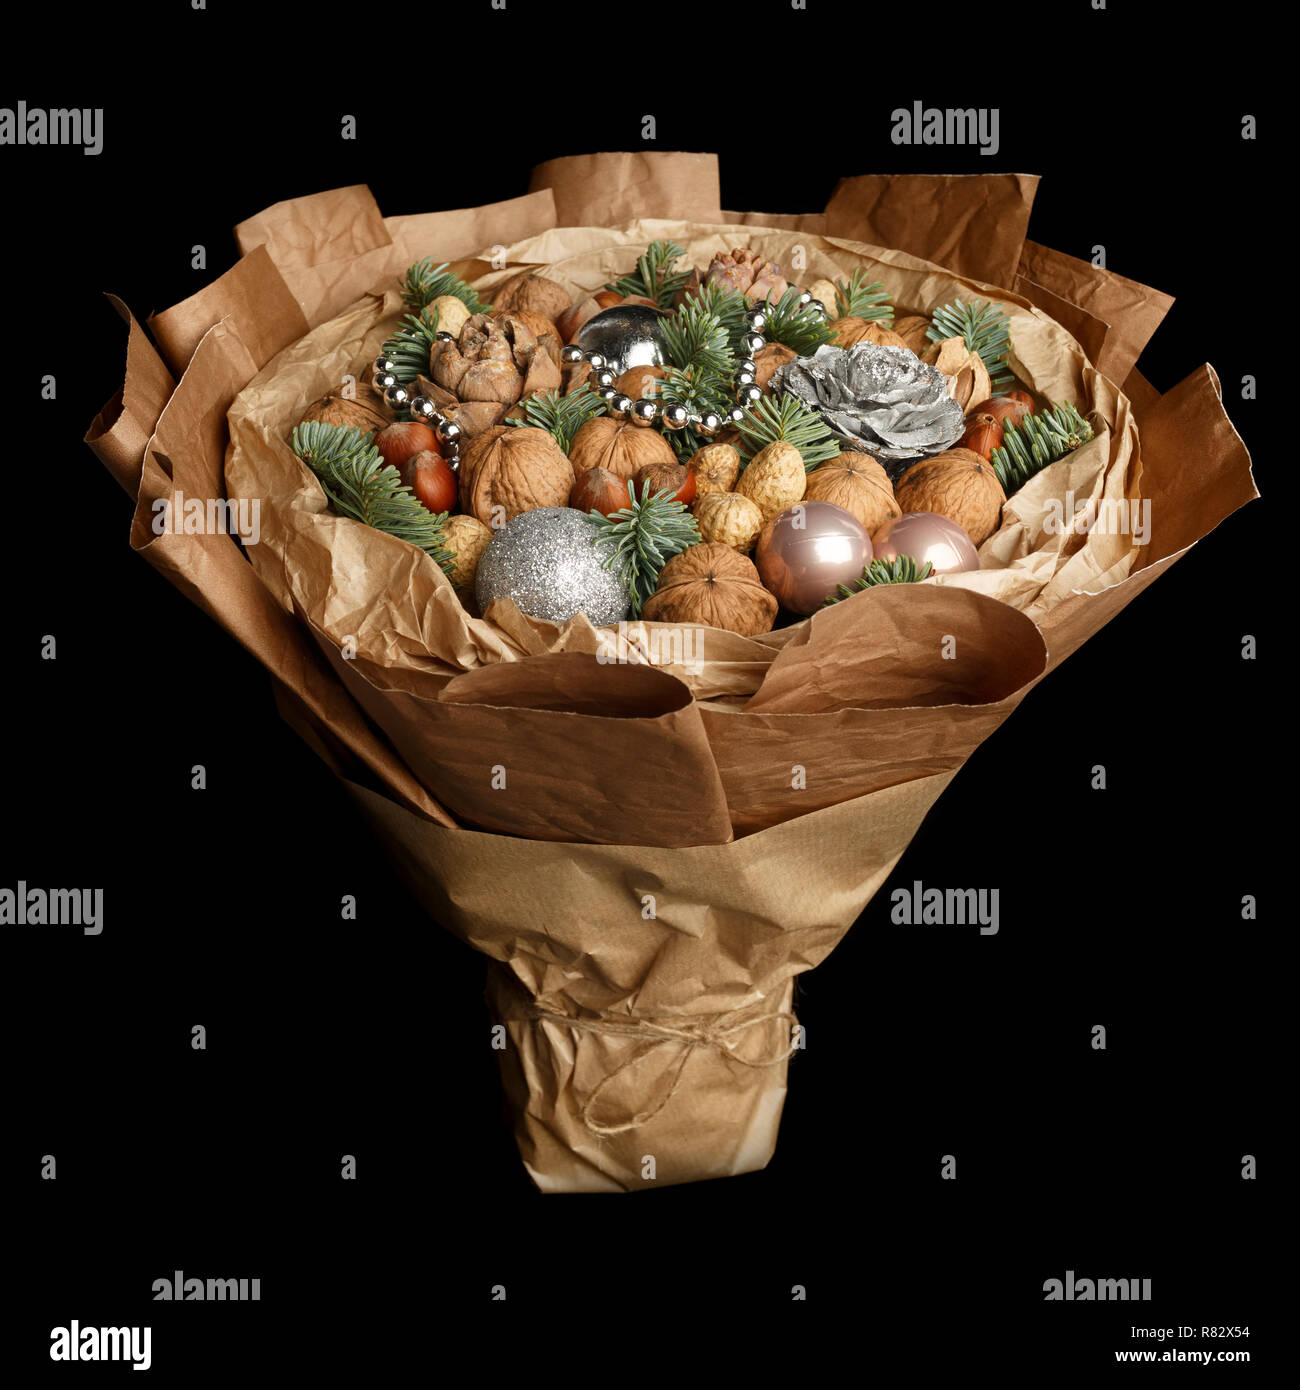 Beautiful Christmas decorative bouquet of various nuts, decorated with twigs of Christmas tree and balls on black background Stock Photo